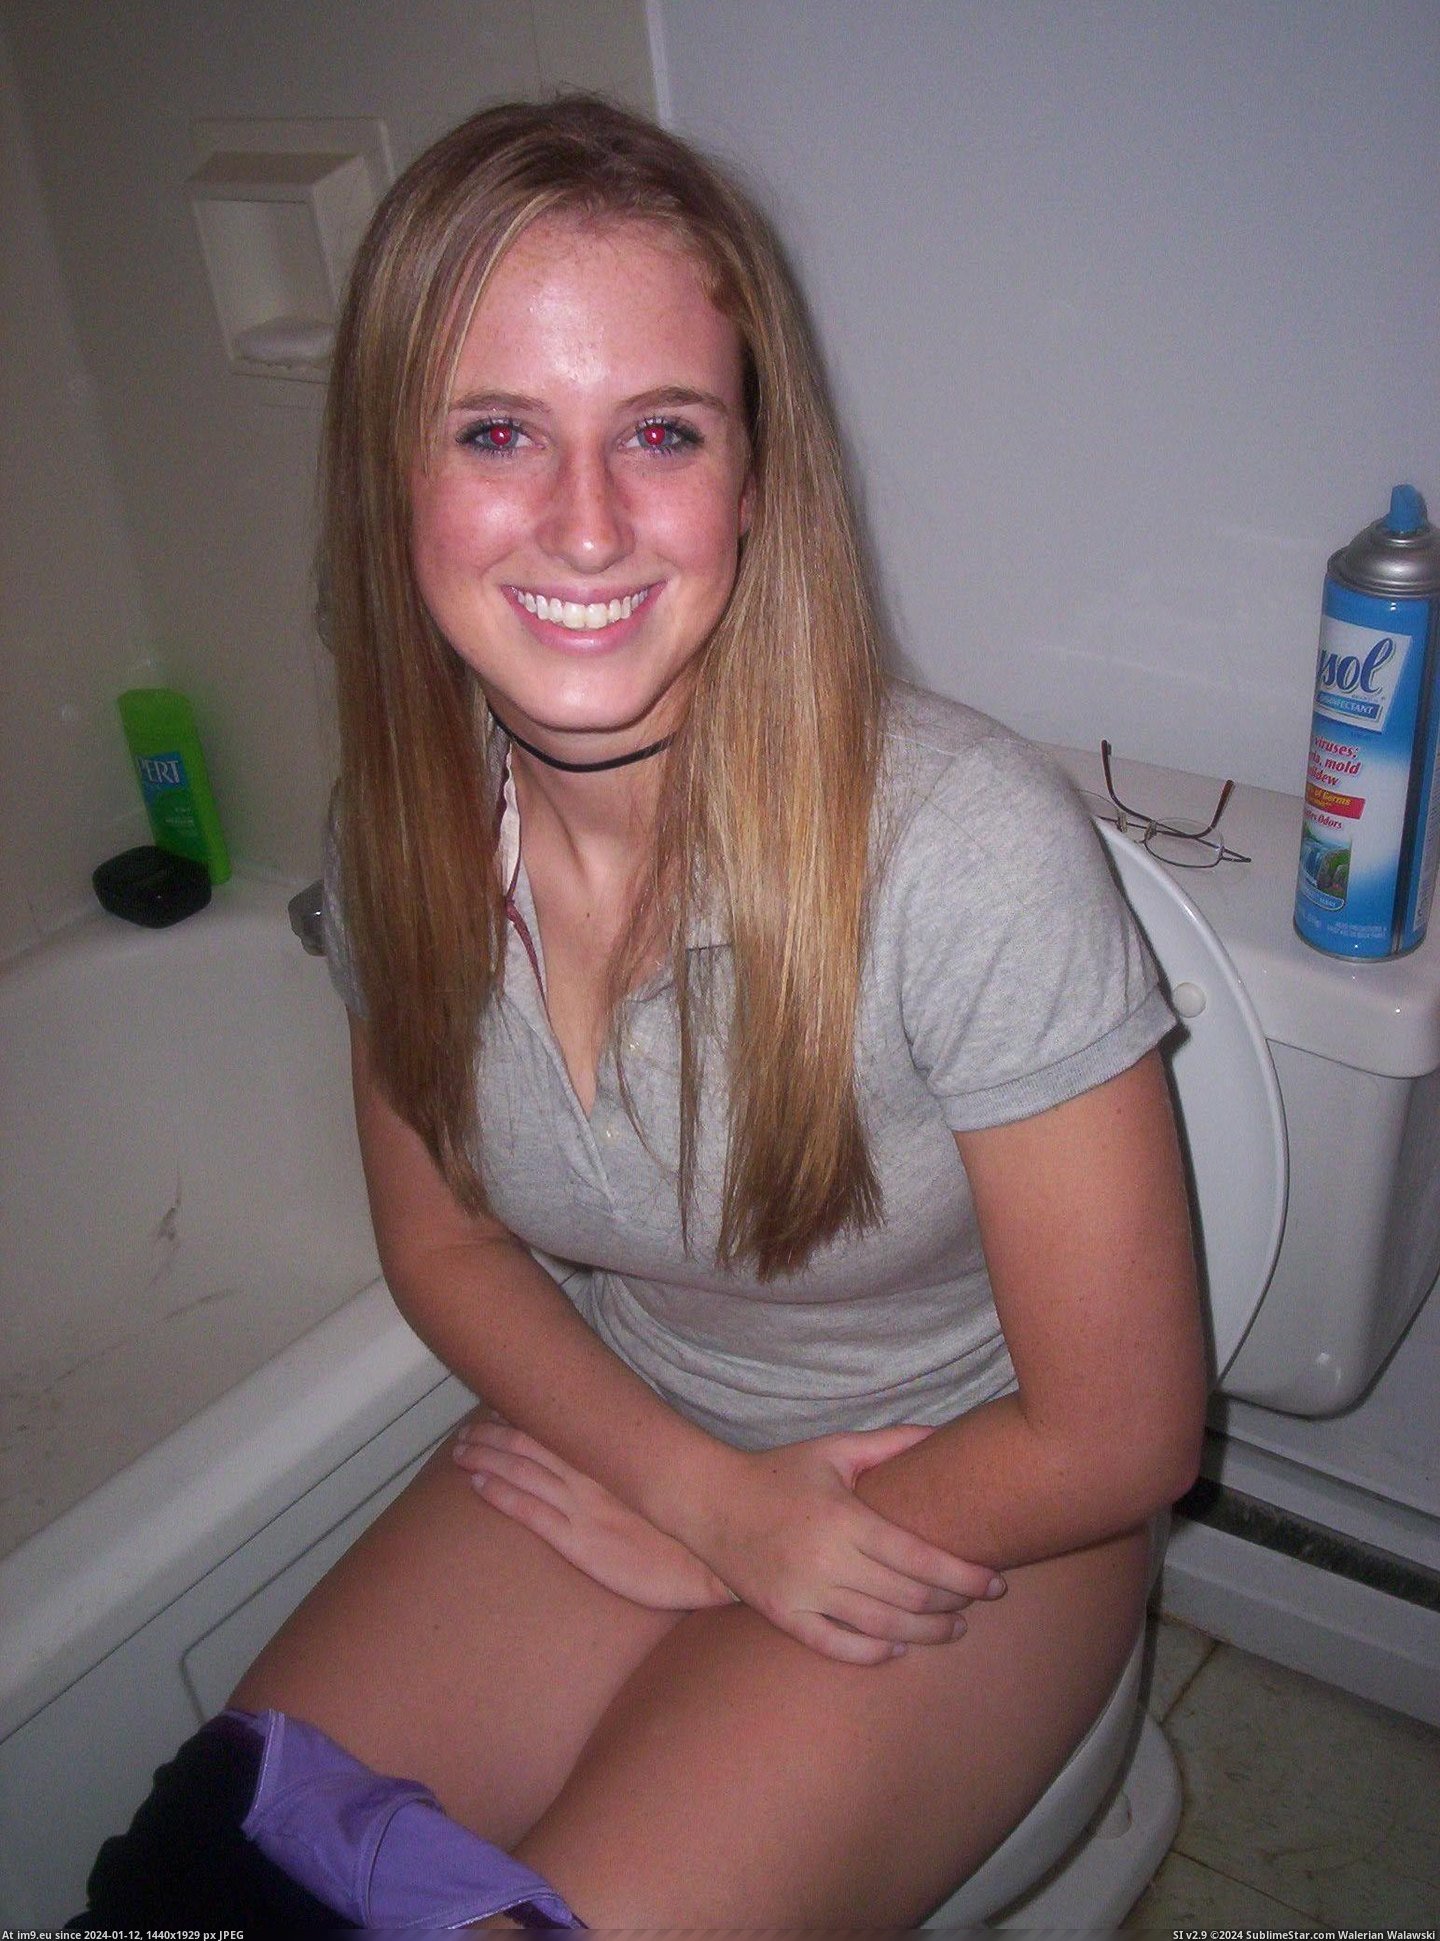 Young Teen Girls Pissing On Toilets 23 (WC toilet bowl peeing porn) (in Teen Girls Pissing Porn (Young Teens Toilet Peeing))